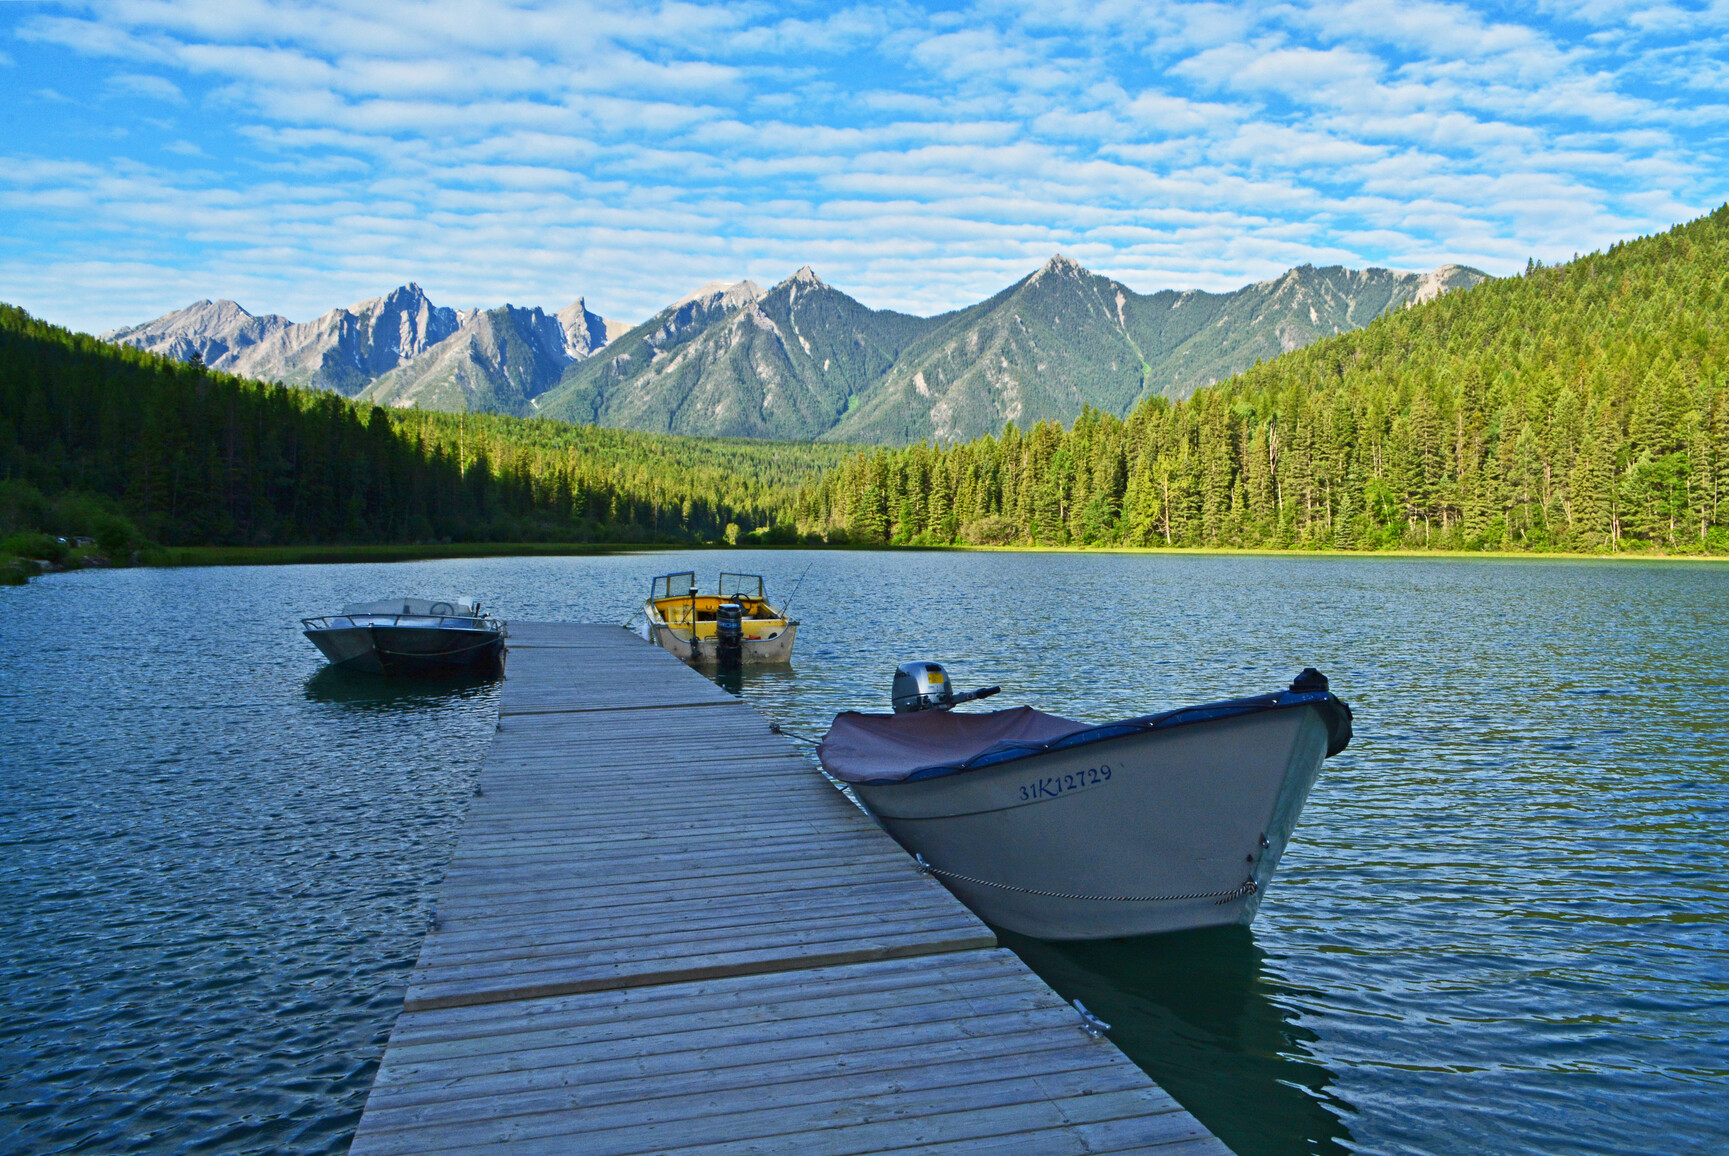 Boats tied to dock. Lake view with mountains and forests in background.